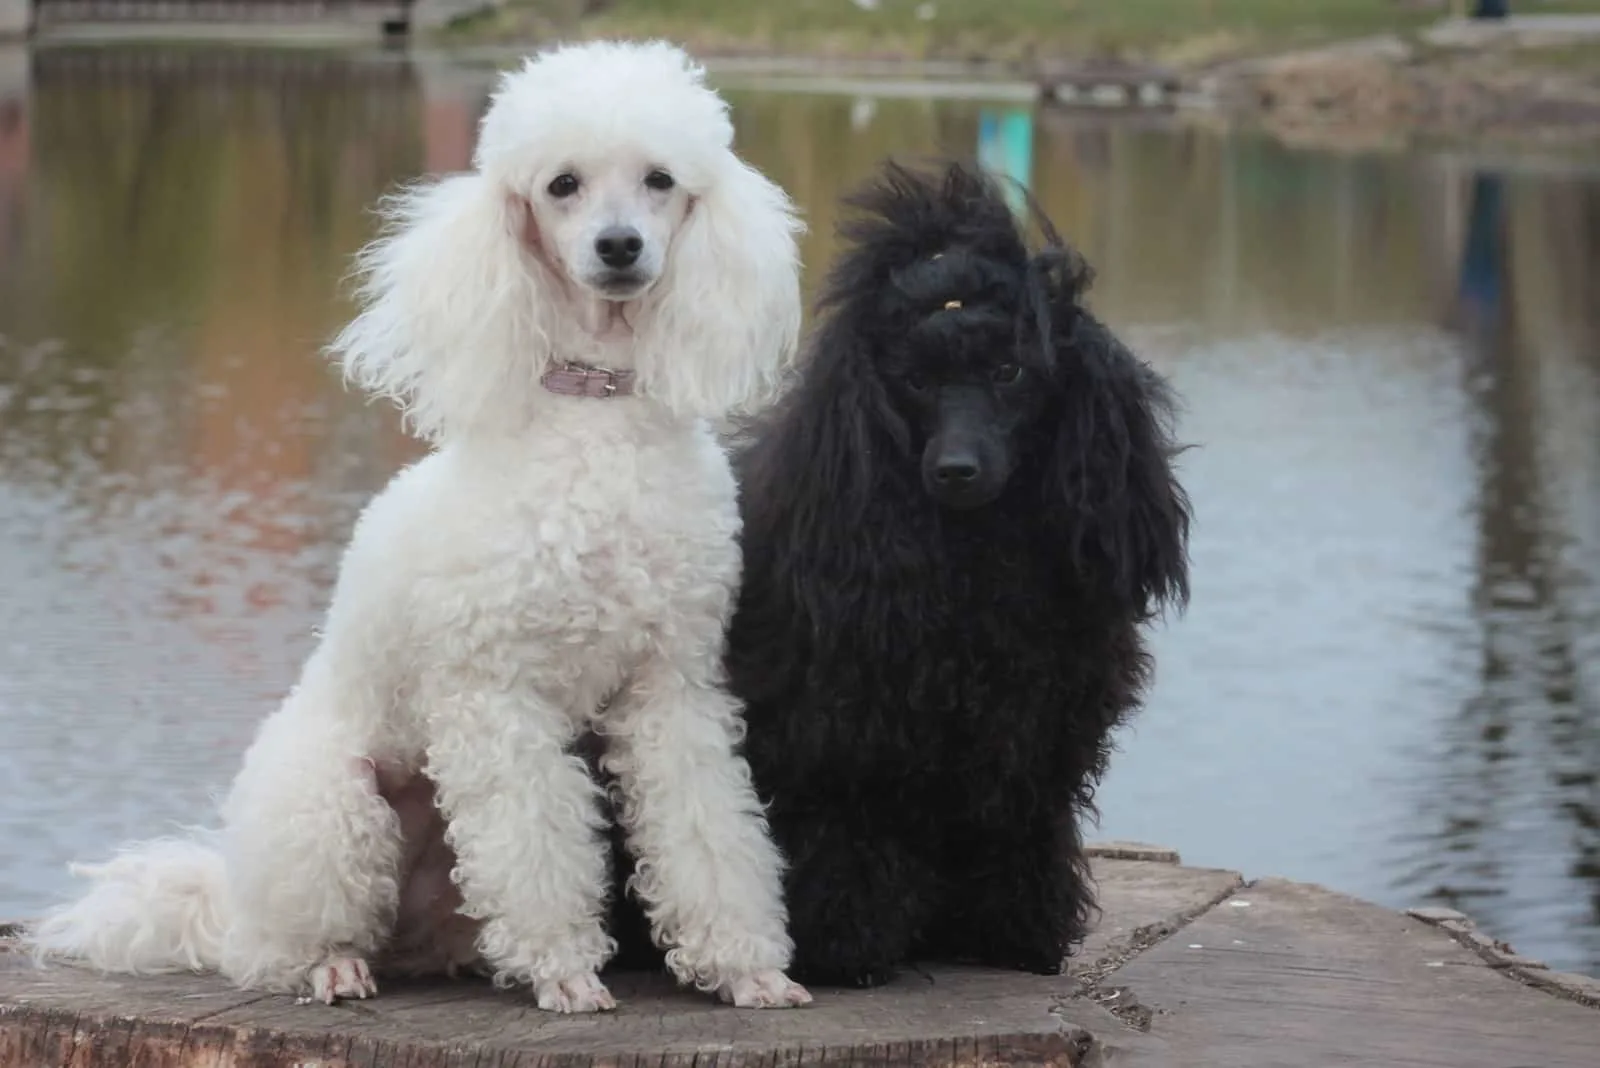 white and black poodle miniature by the lake